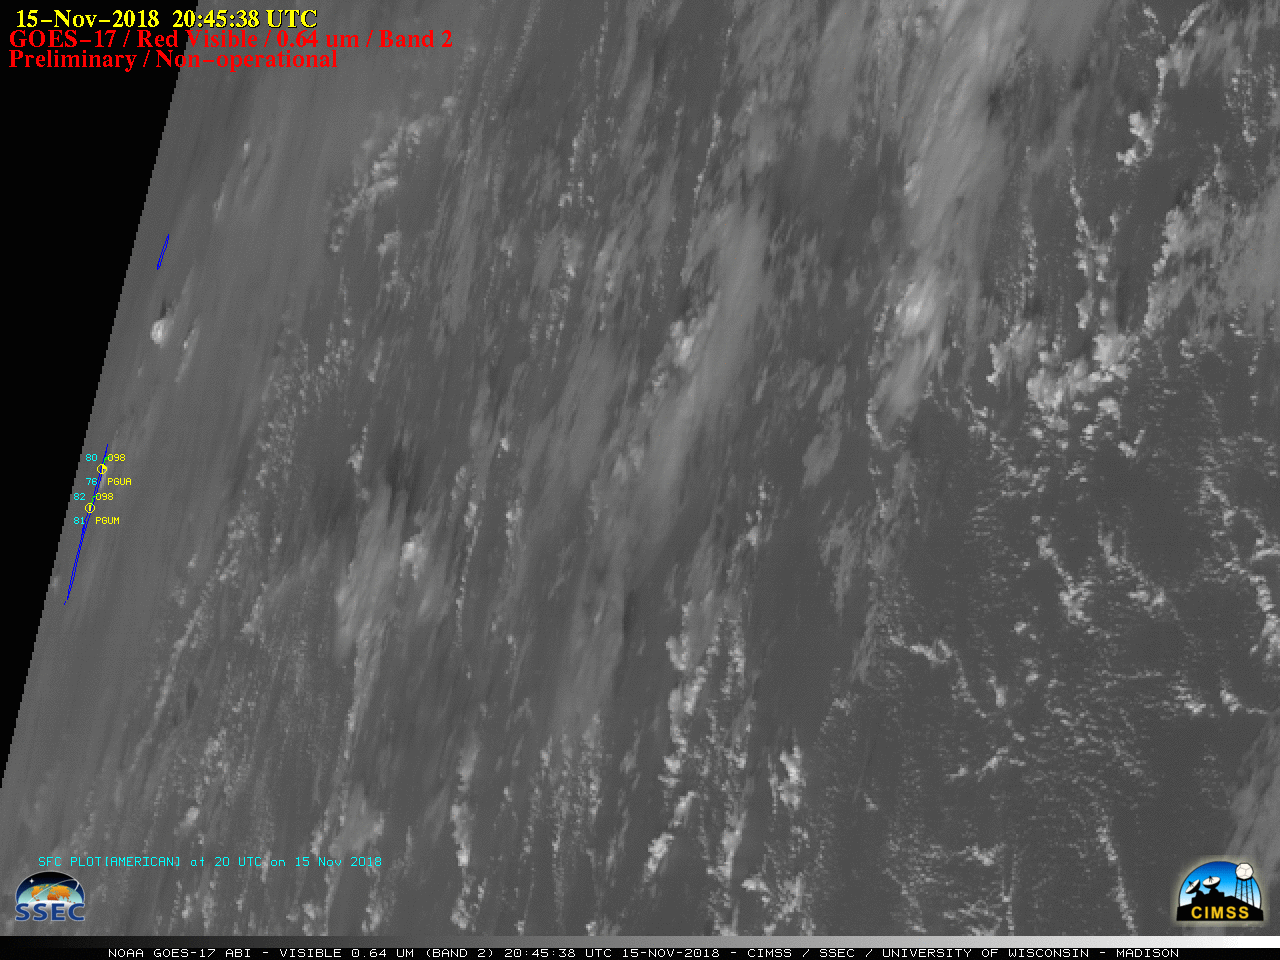 GOES-17 "Red" Visible (0.64 µm) images, with hourly plots of surface observations [click to play animation | MP4]